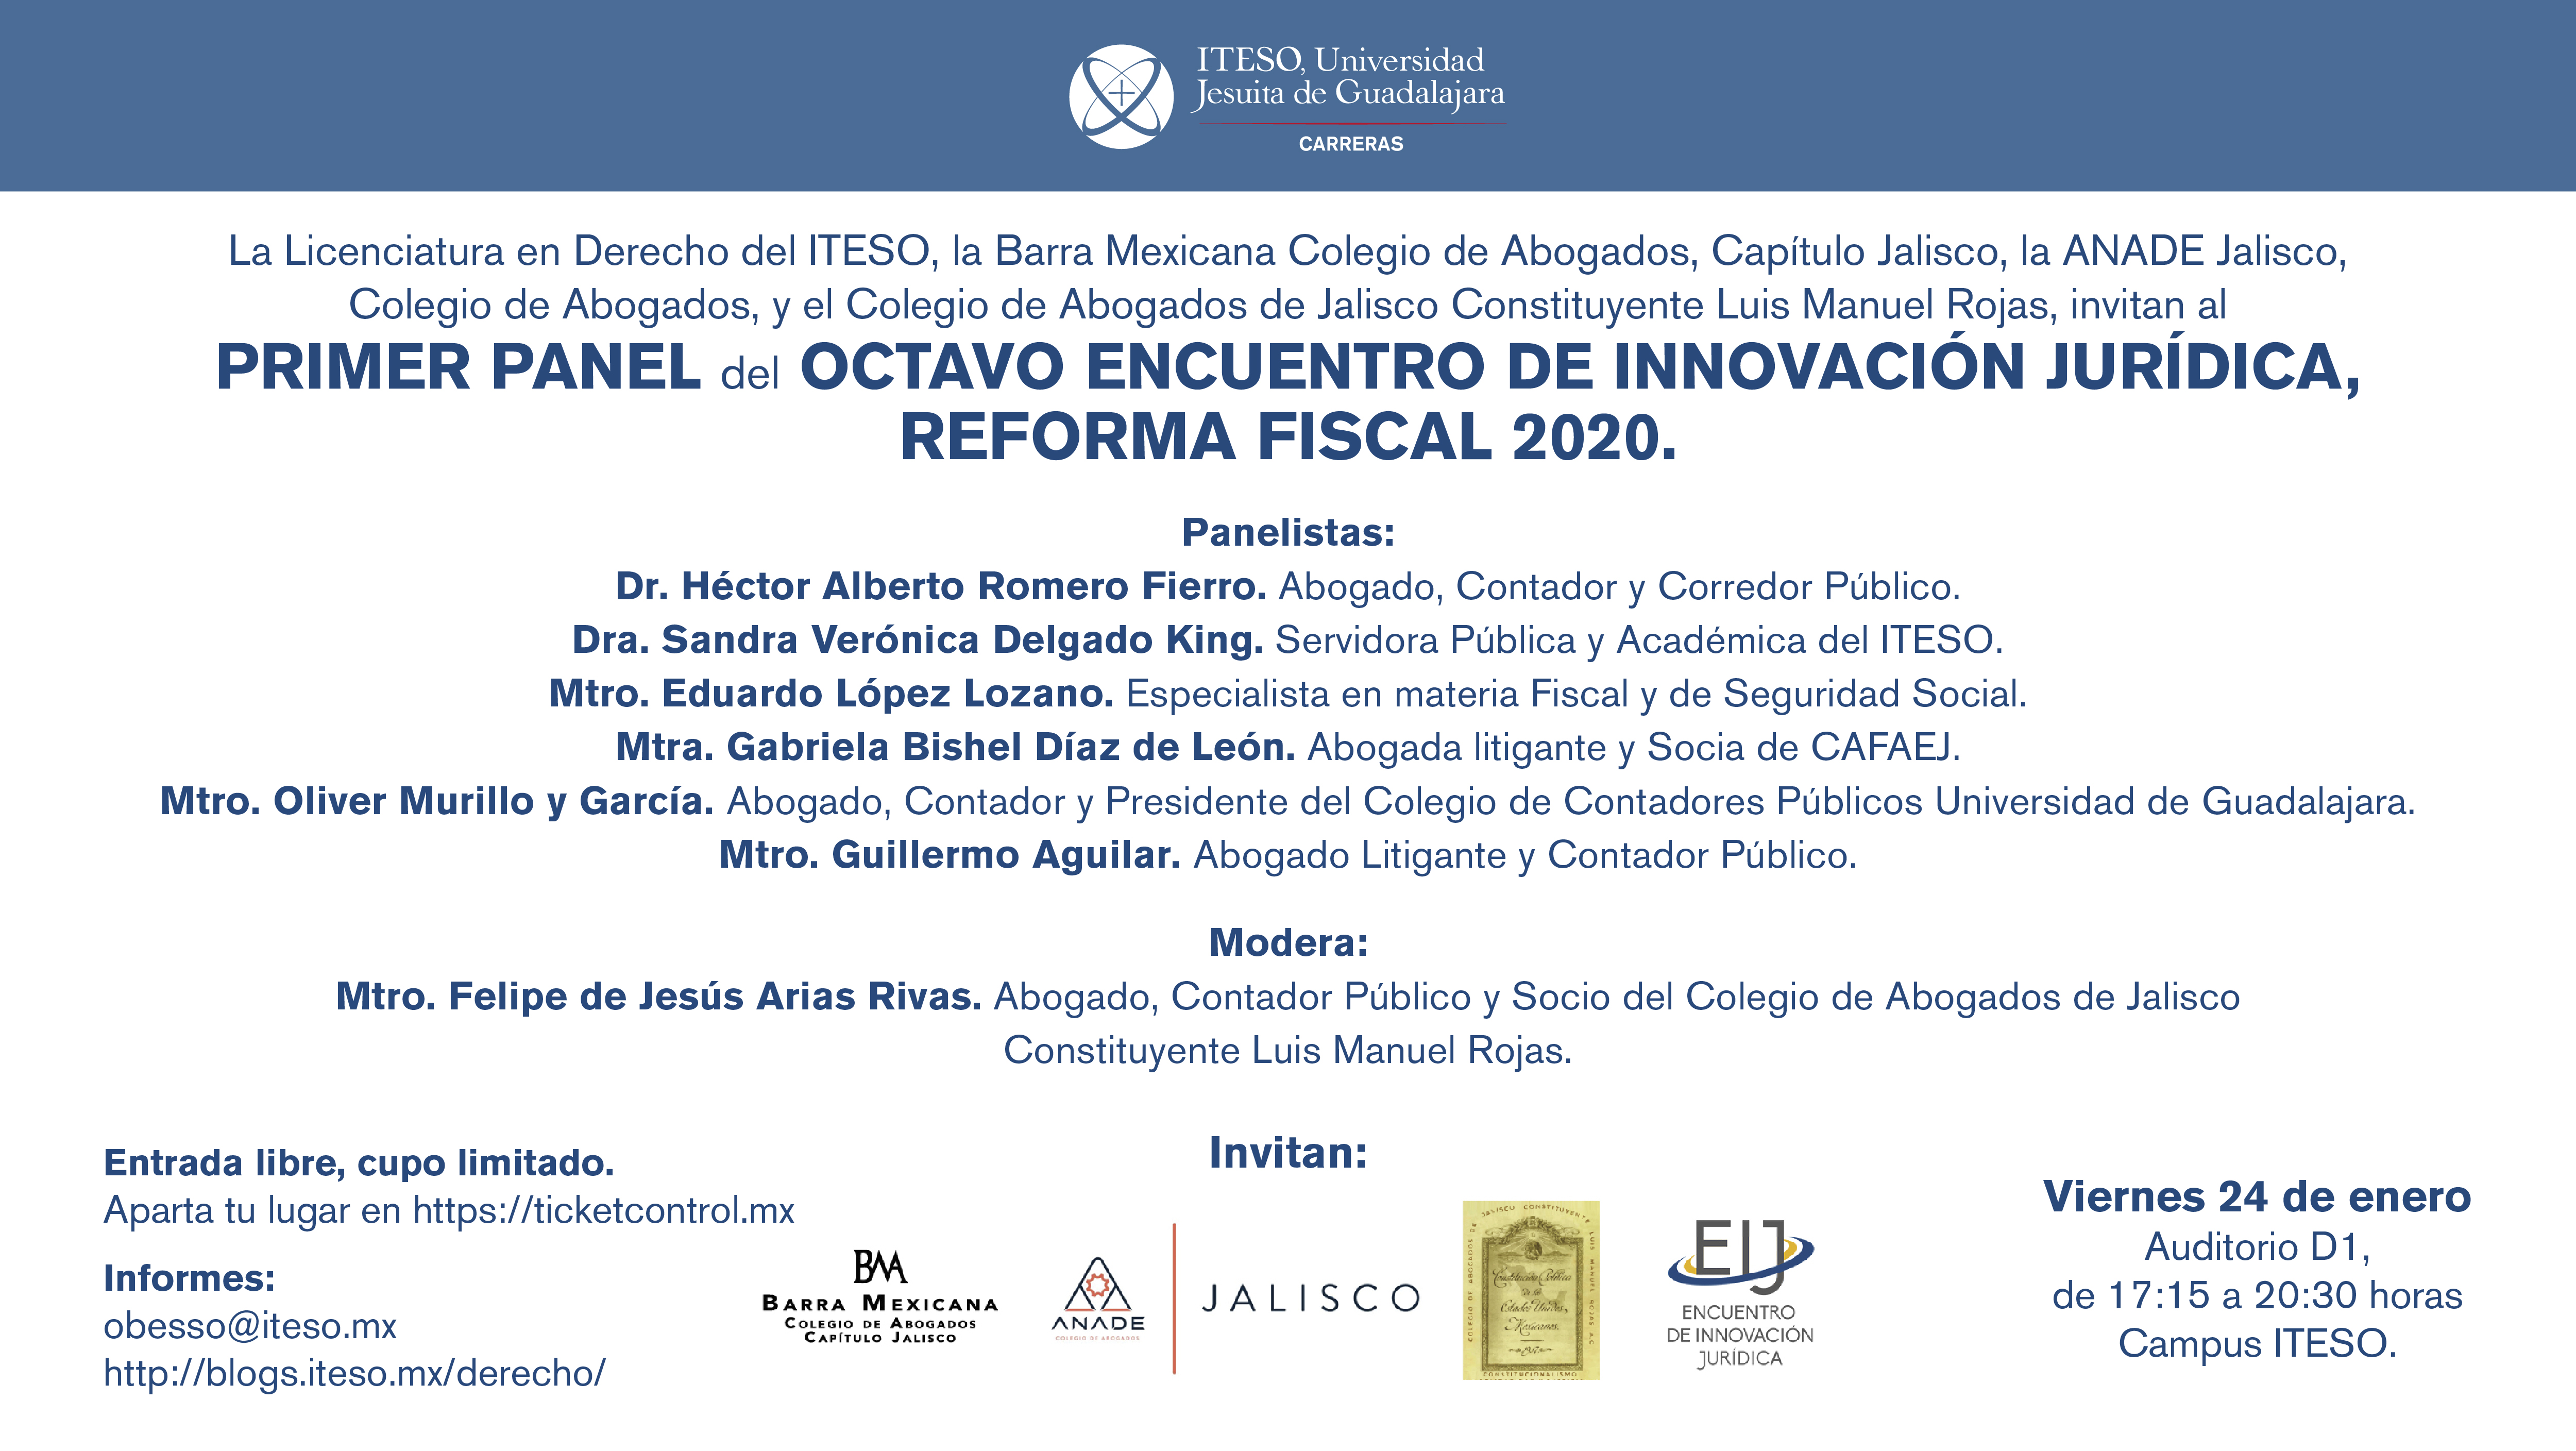 REFORMA FISCAL 2020  